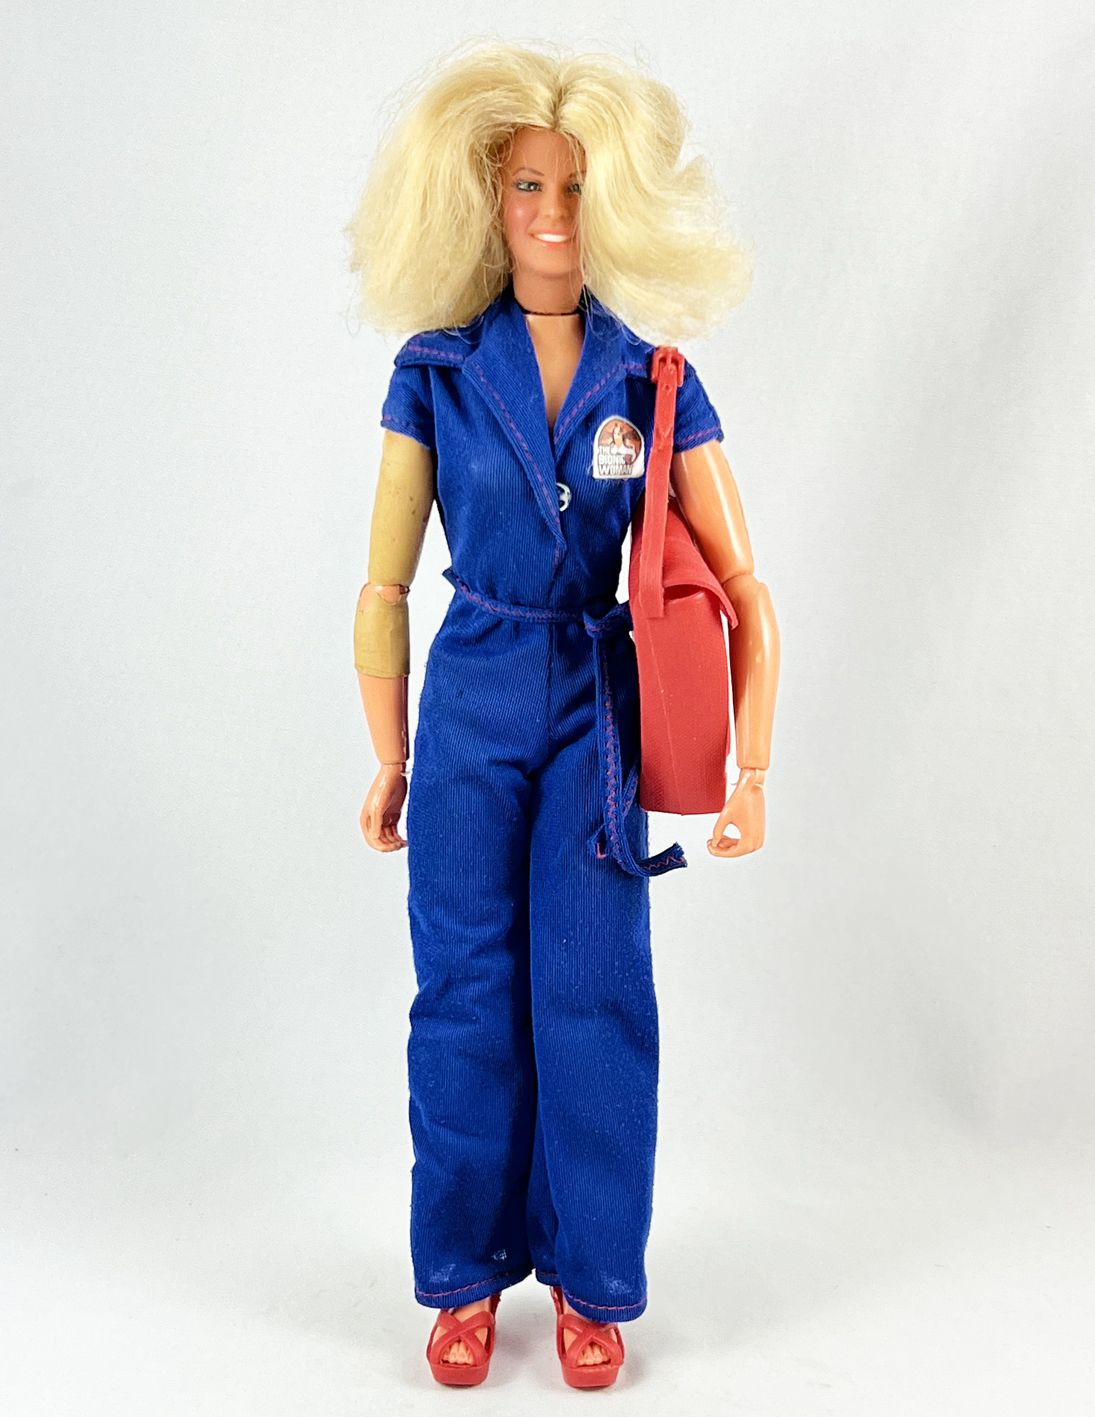 Made to fit BIONIC WOMAN dolls #43 Handmade Clothes, Dress, Necklace &  Purse Set